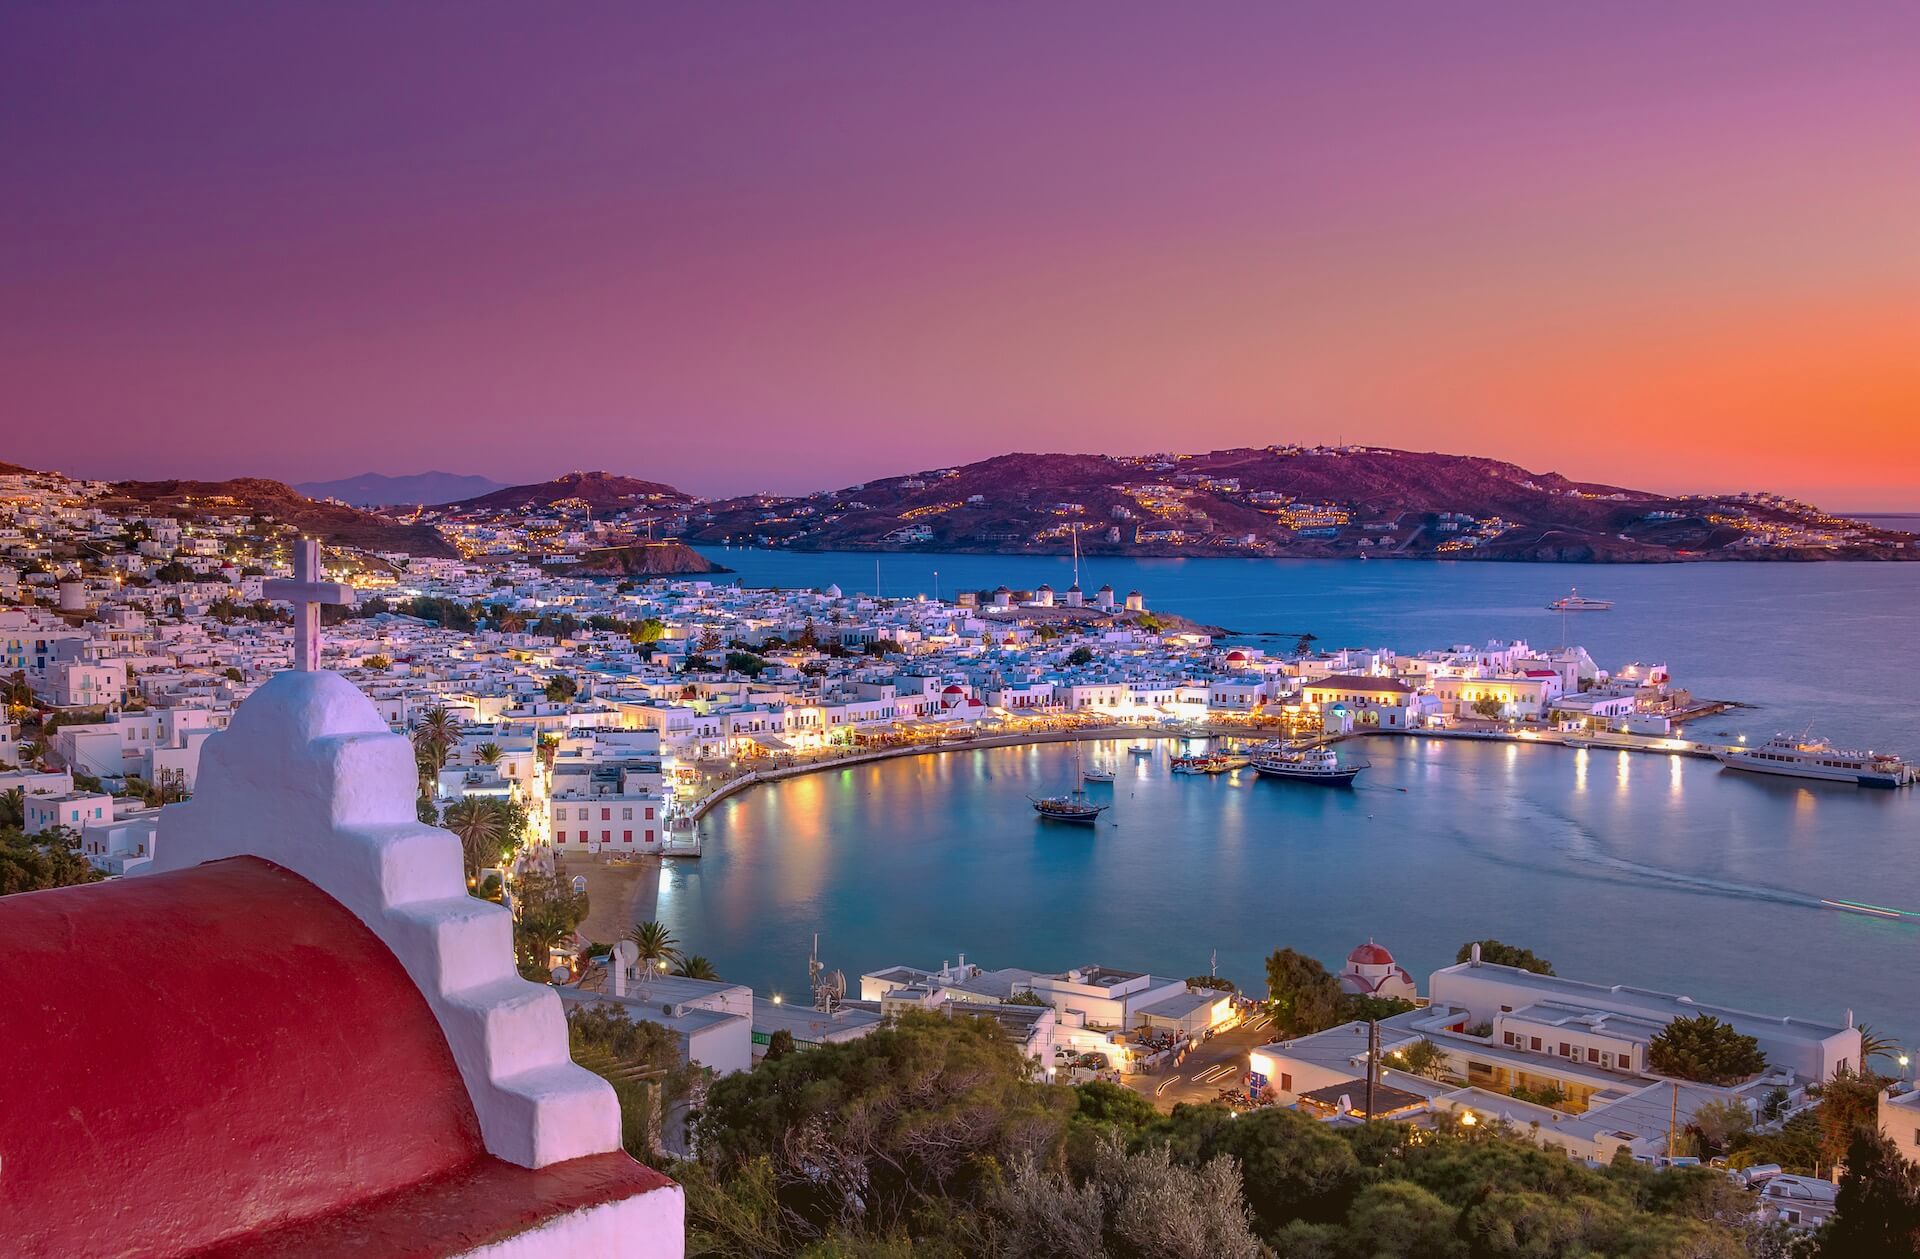 Mykonos during the nighttime